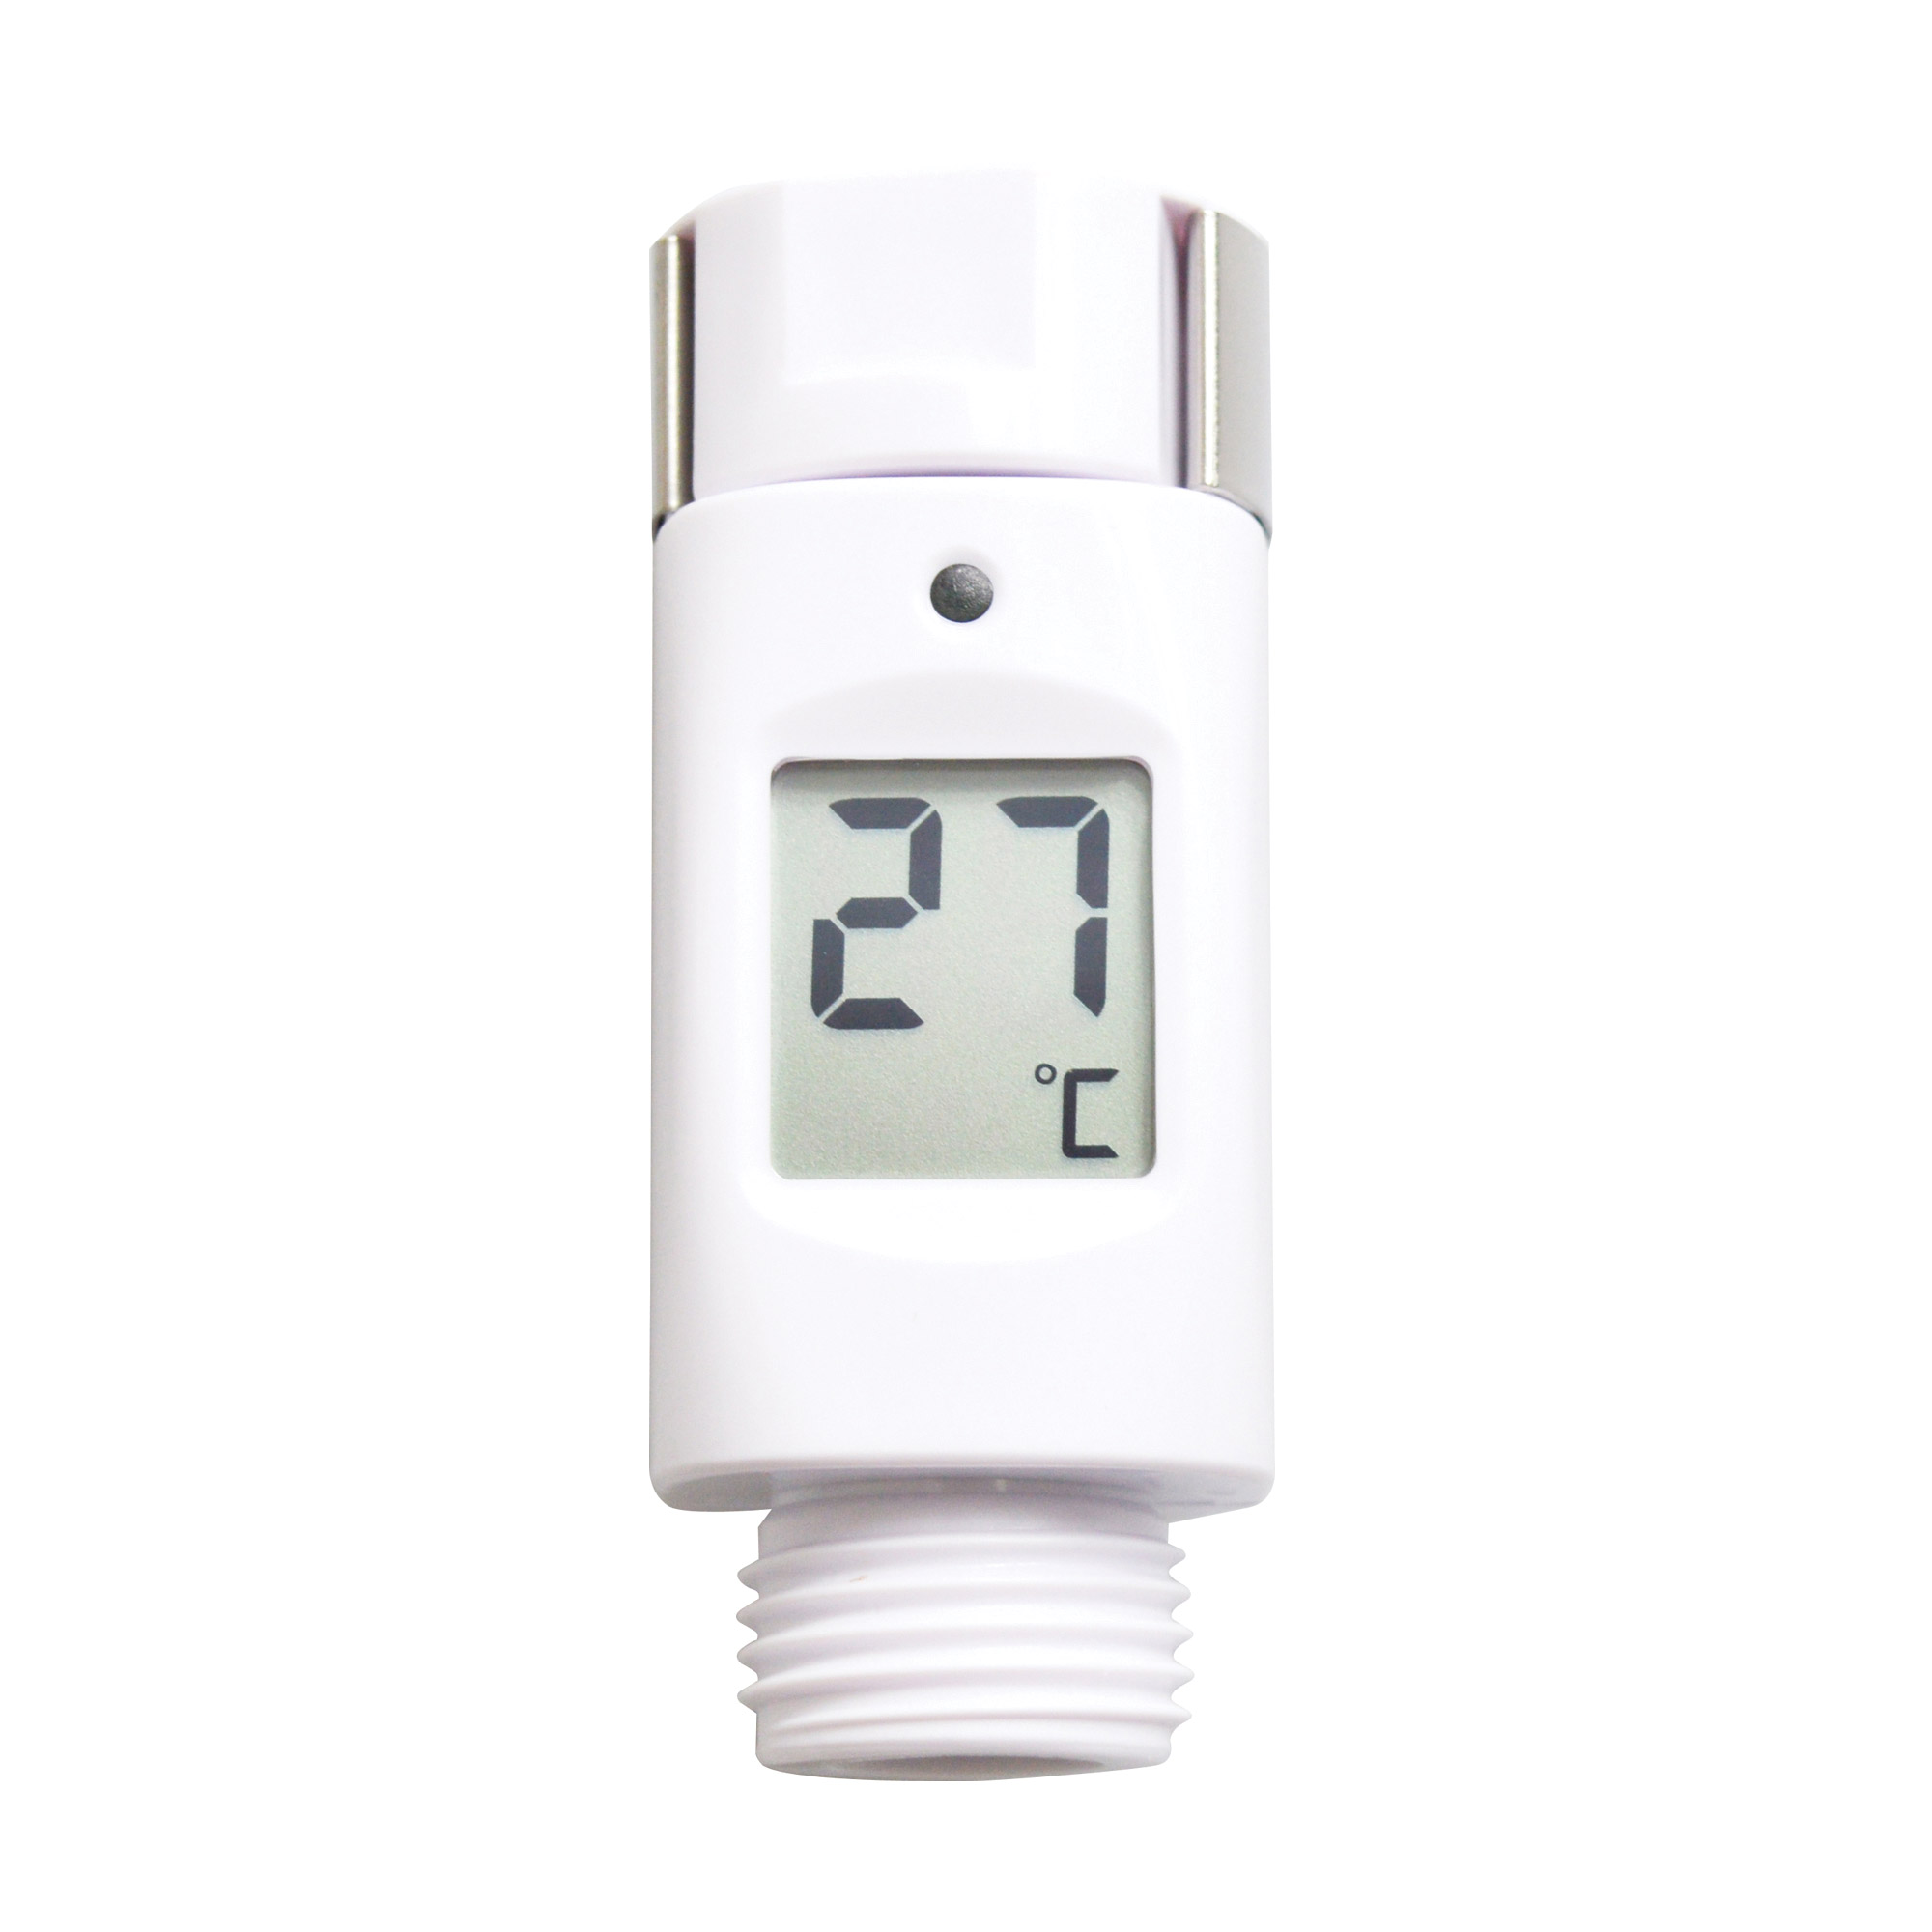 Waterproof Digital Shower Thermometer with Temperature Alert - EACH